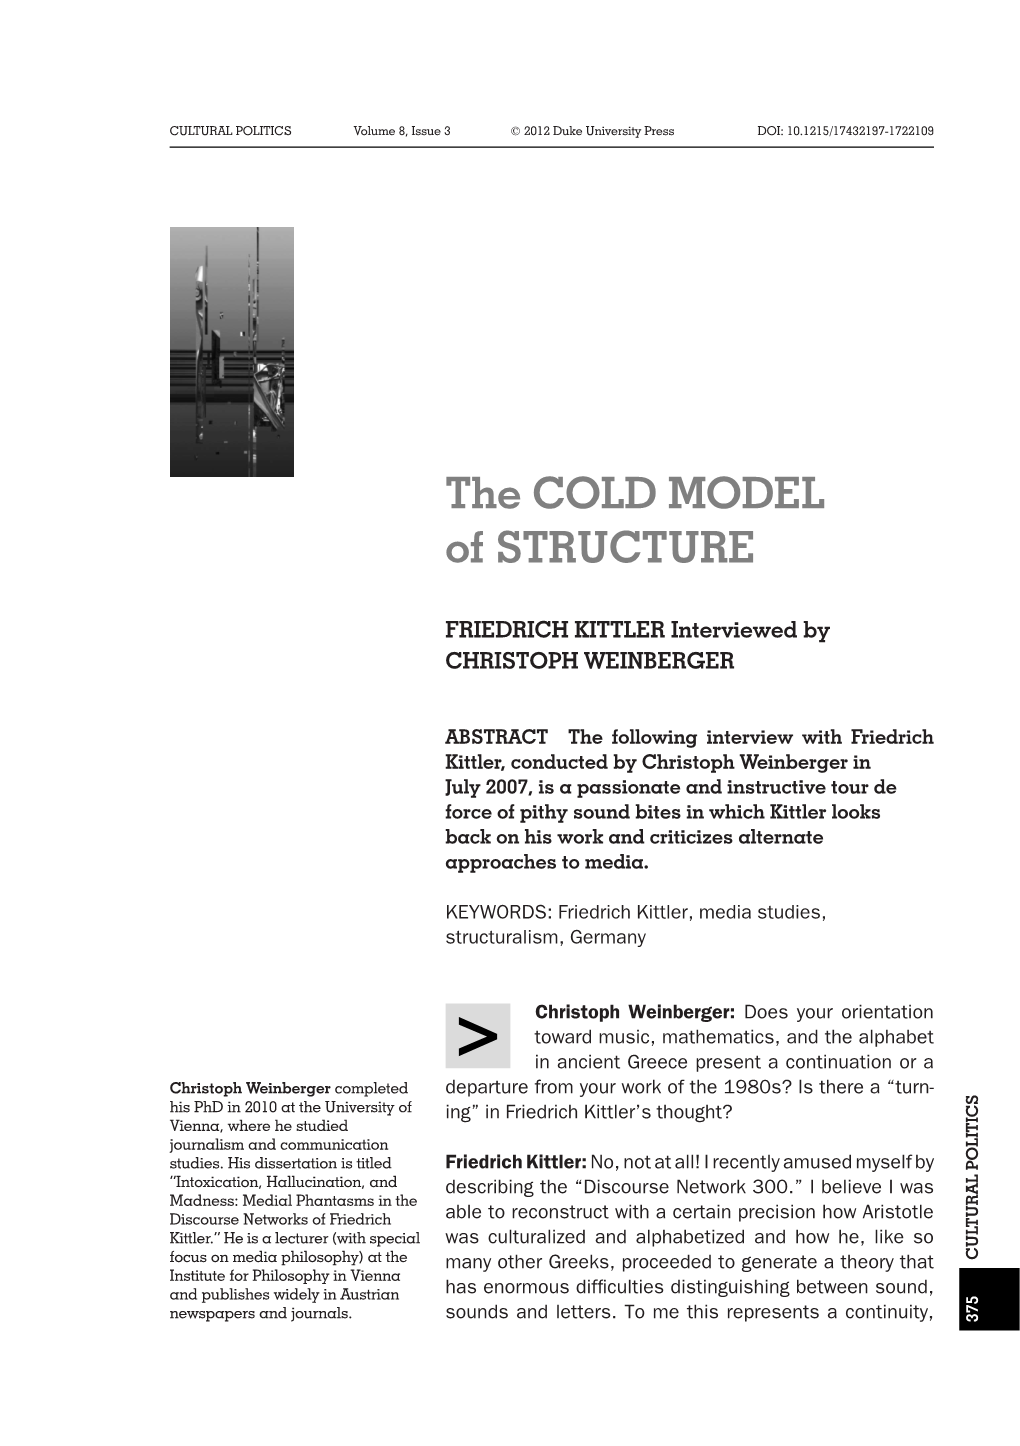 The Cold Model of Structure. Friedrich Kittler Interviewed by Christoph